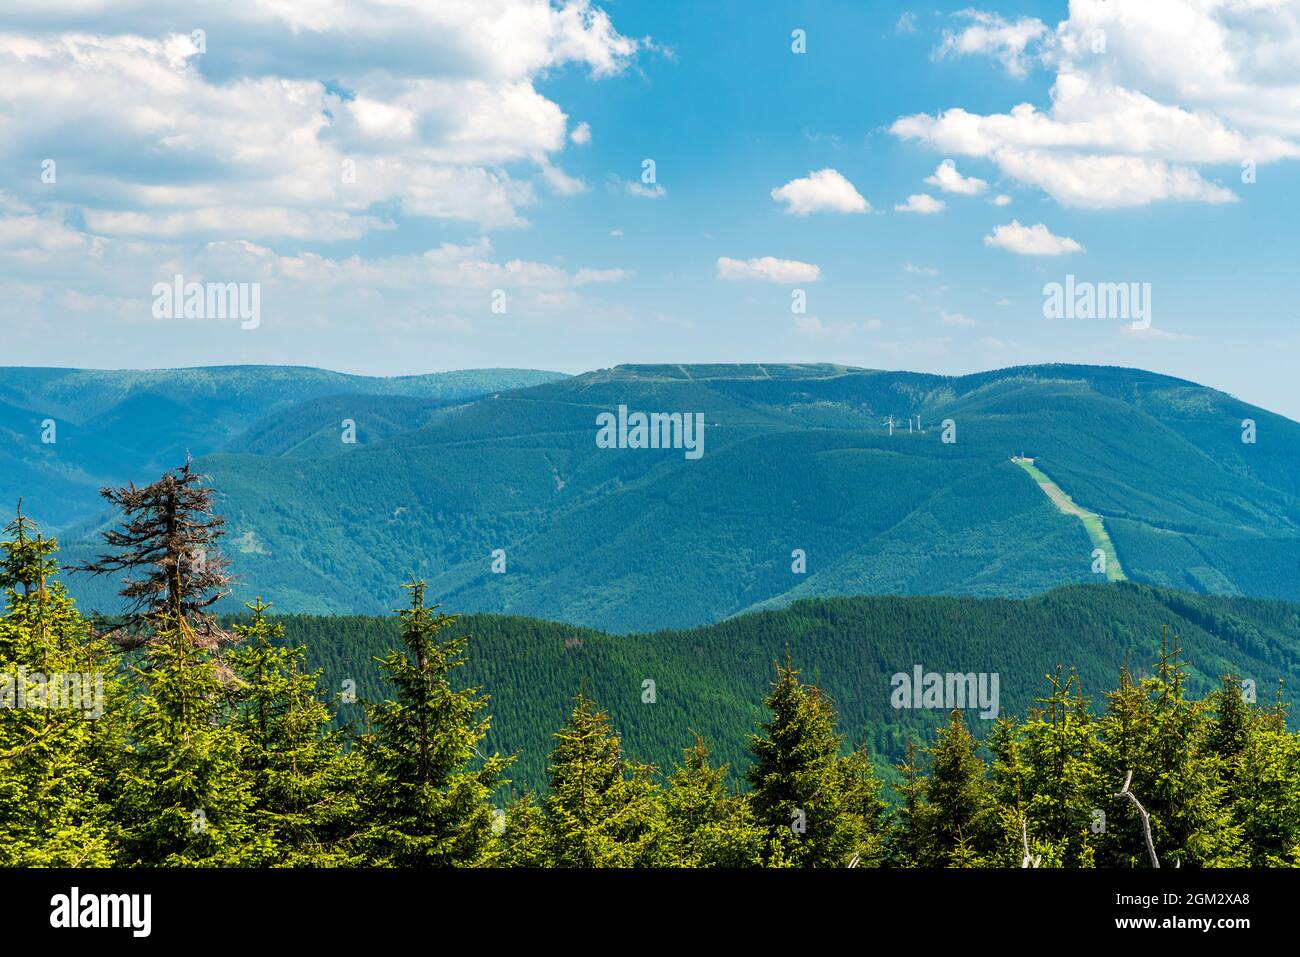 View to Dlouhe strane from Spaleny vrch hill in Jeseniky mountains in Czech republic during beautiful day with blue sky and clouds Stock Photo